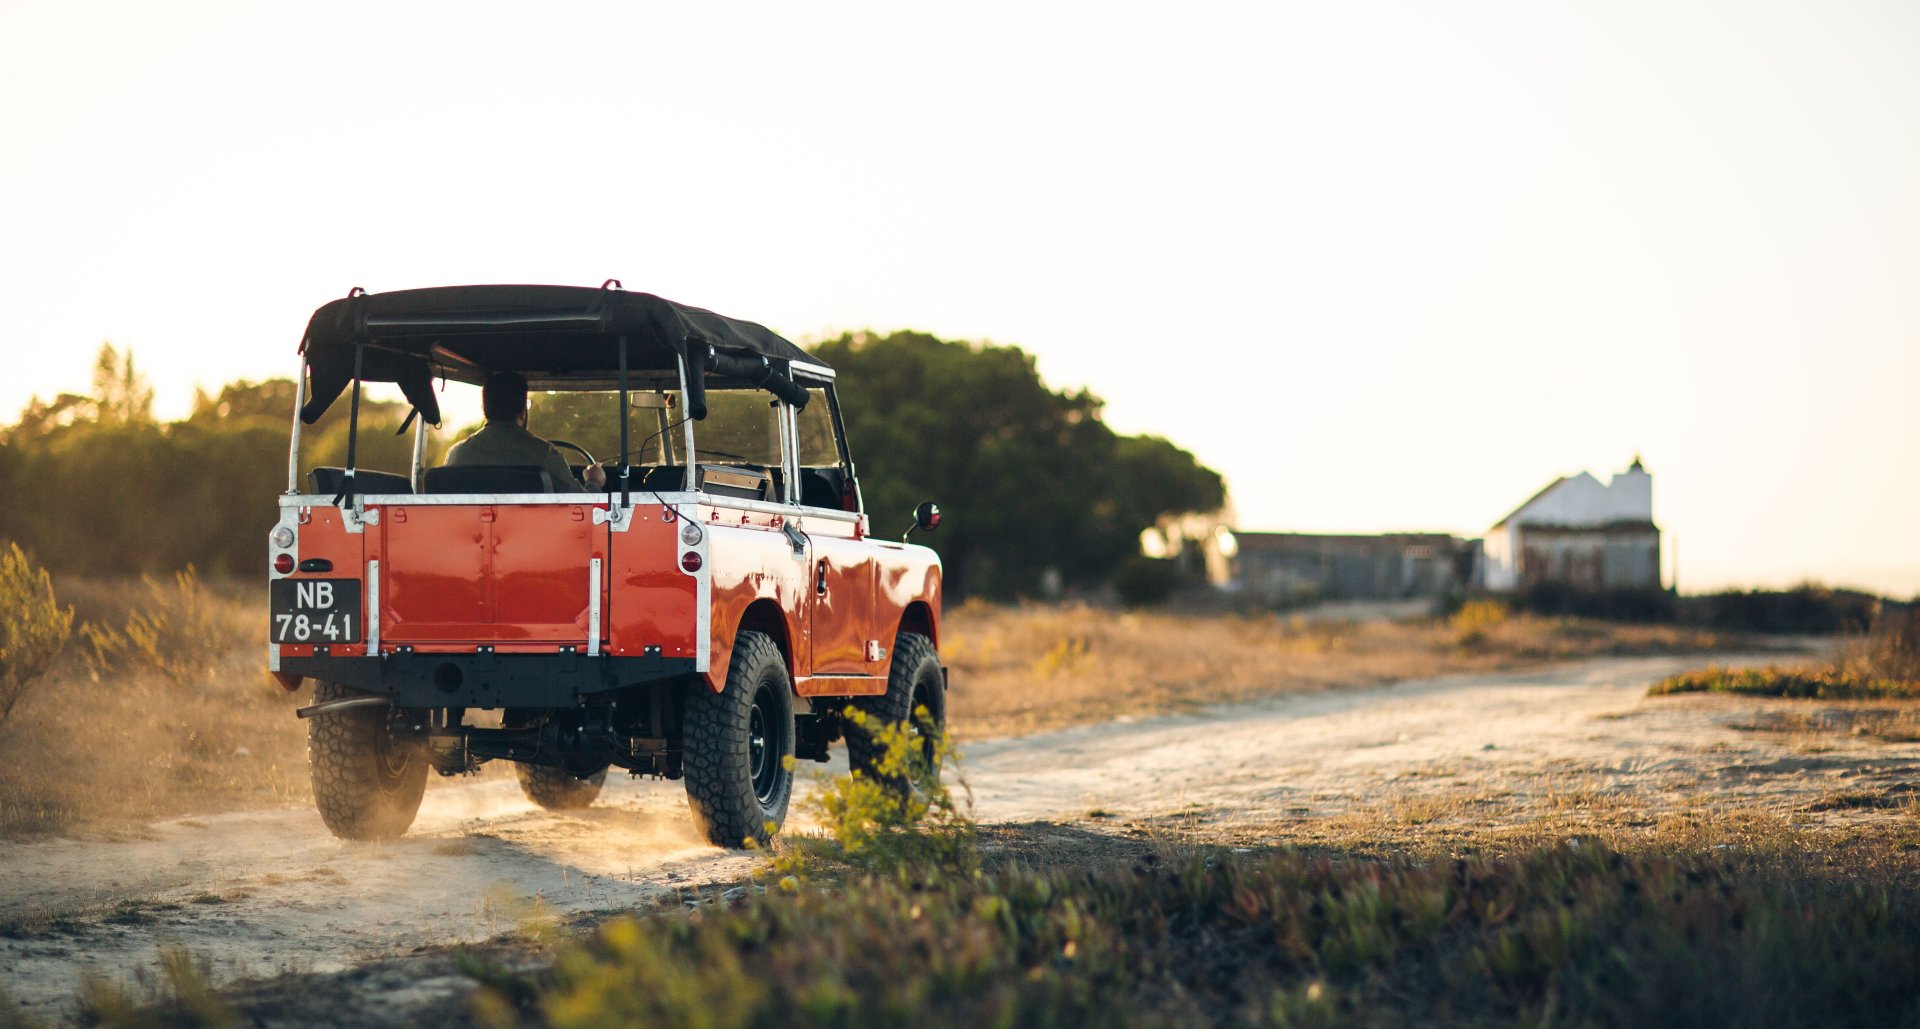 A red Land Rover.